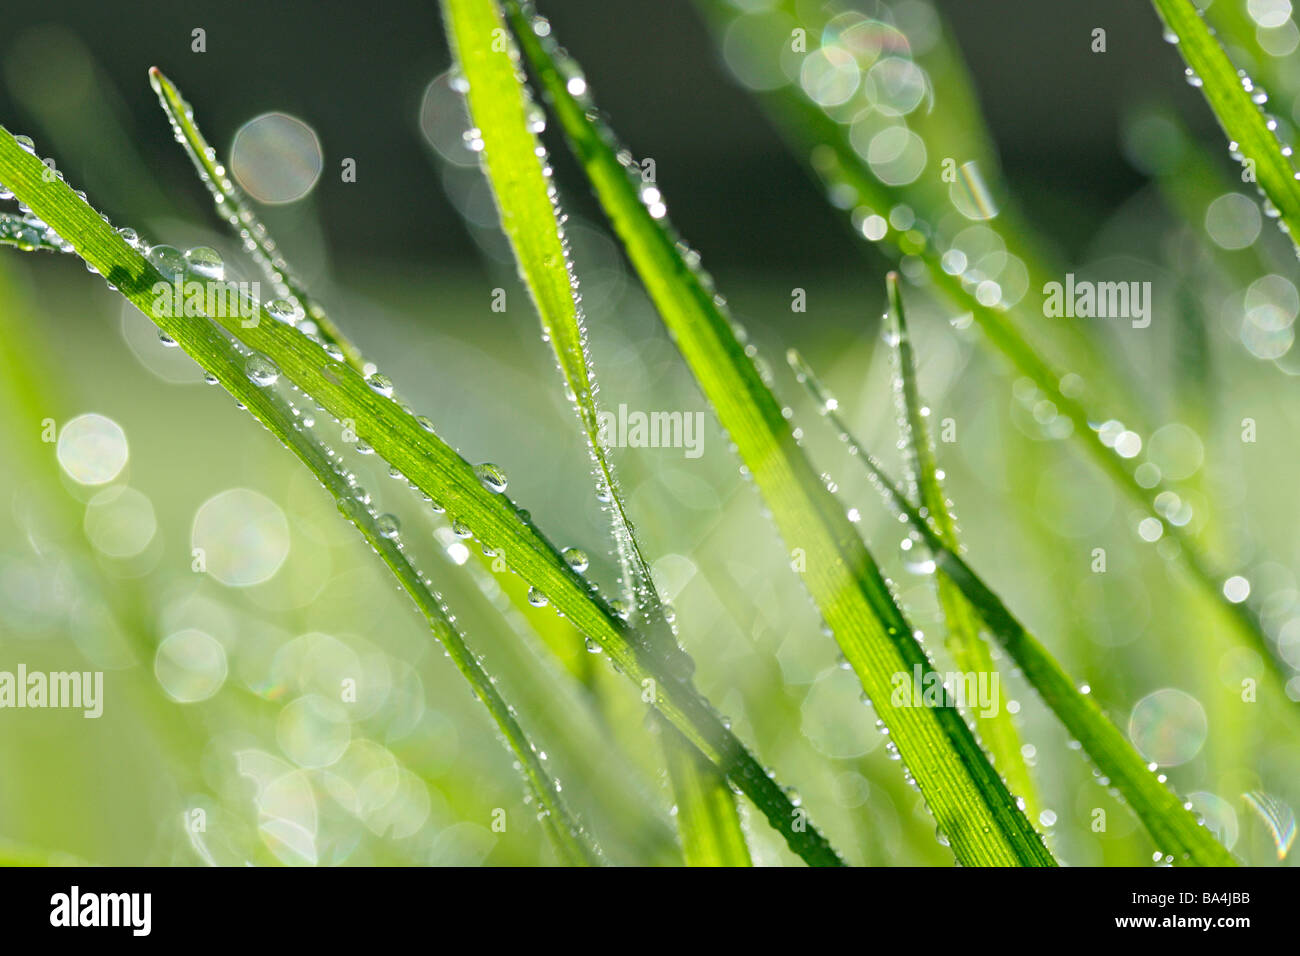 Grass and droplets Stock Photo